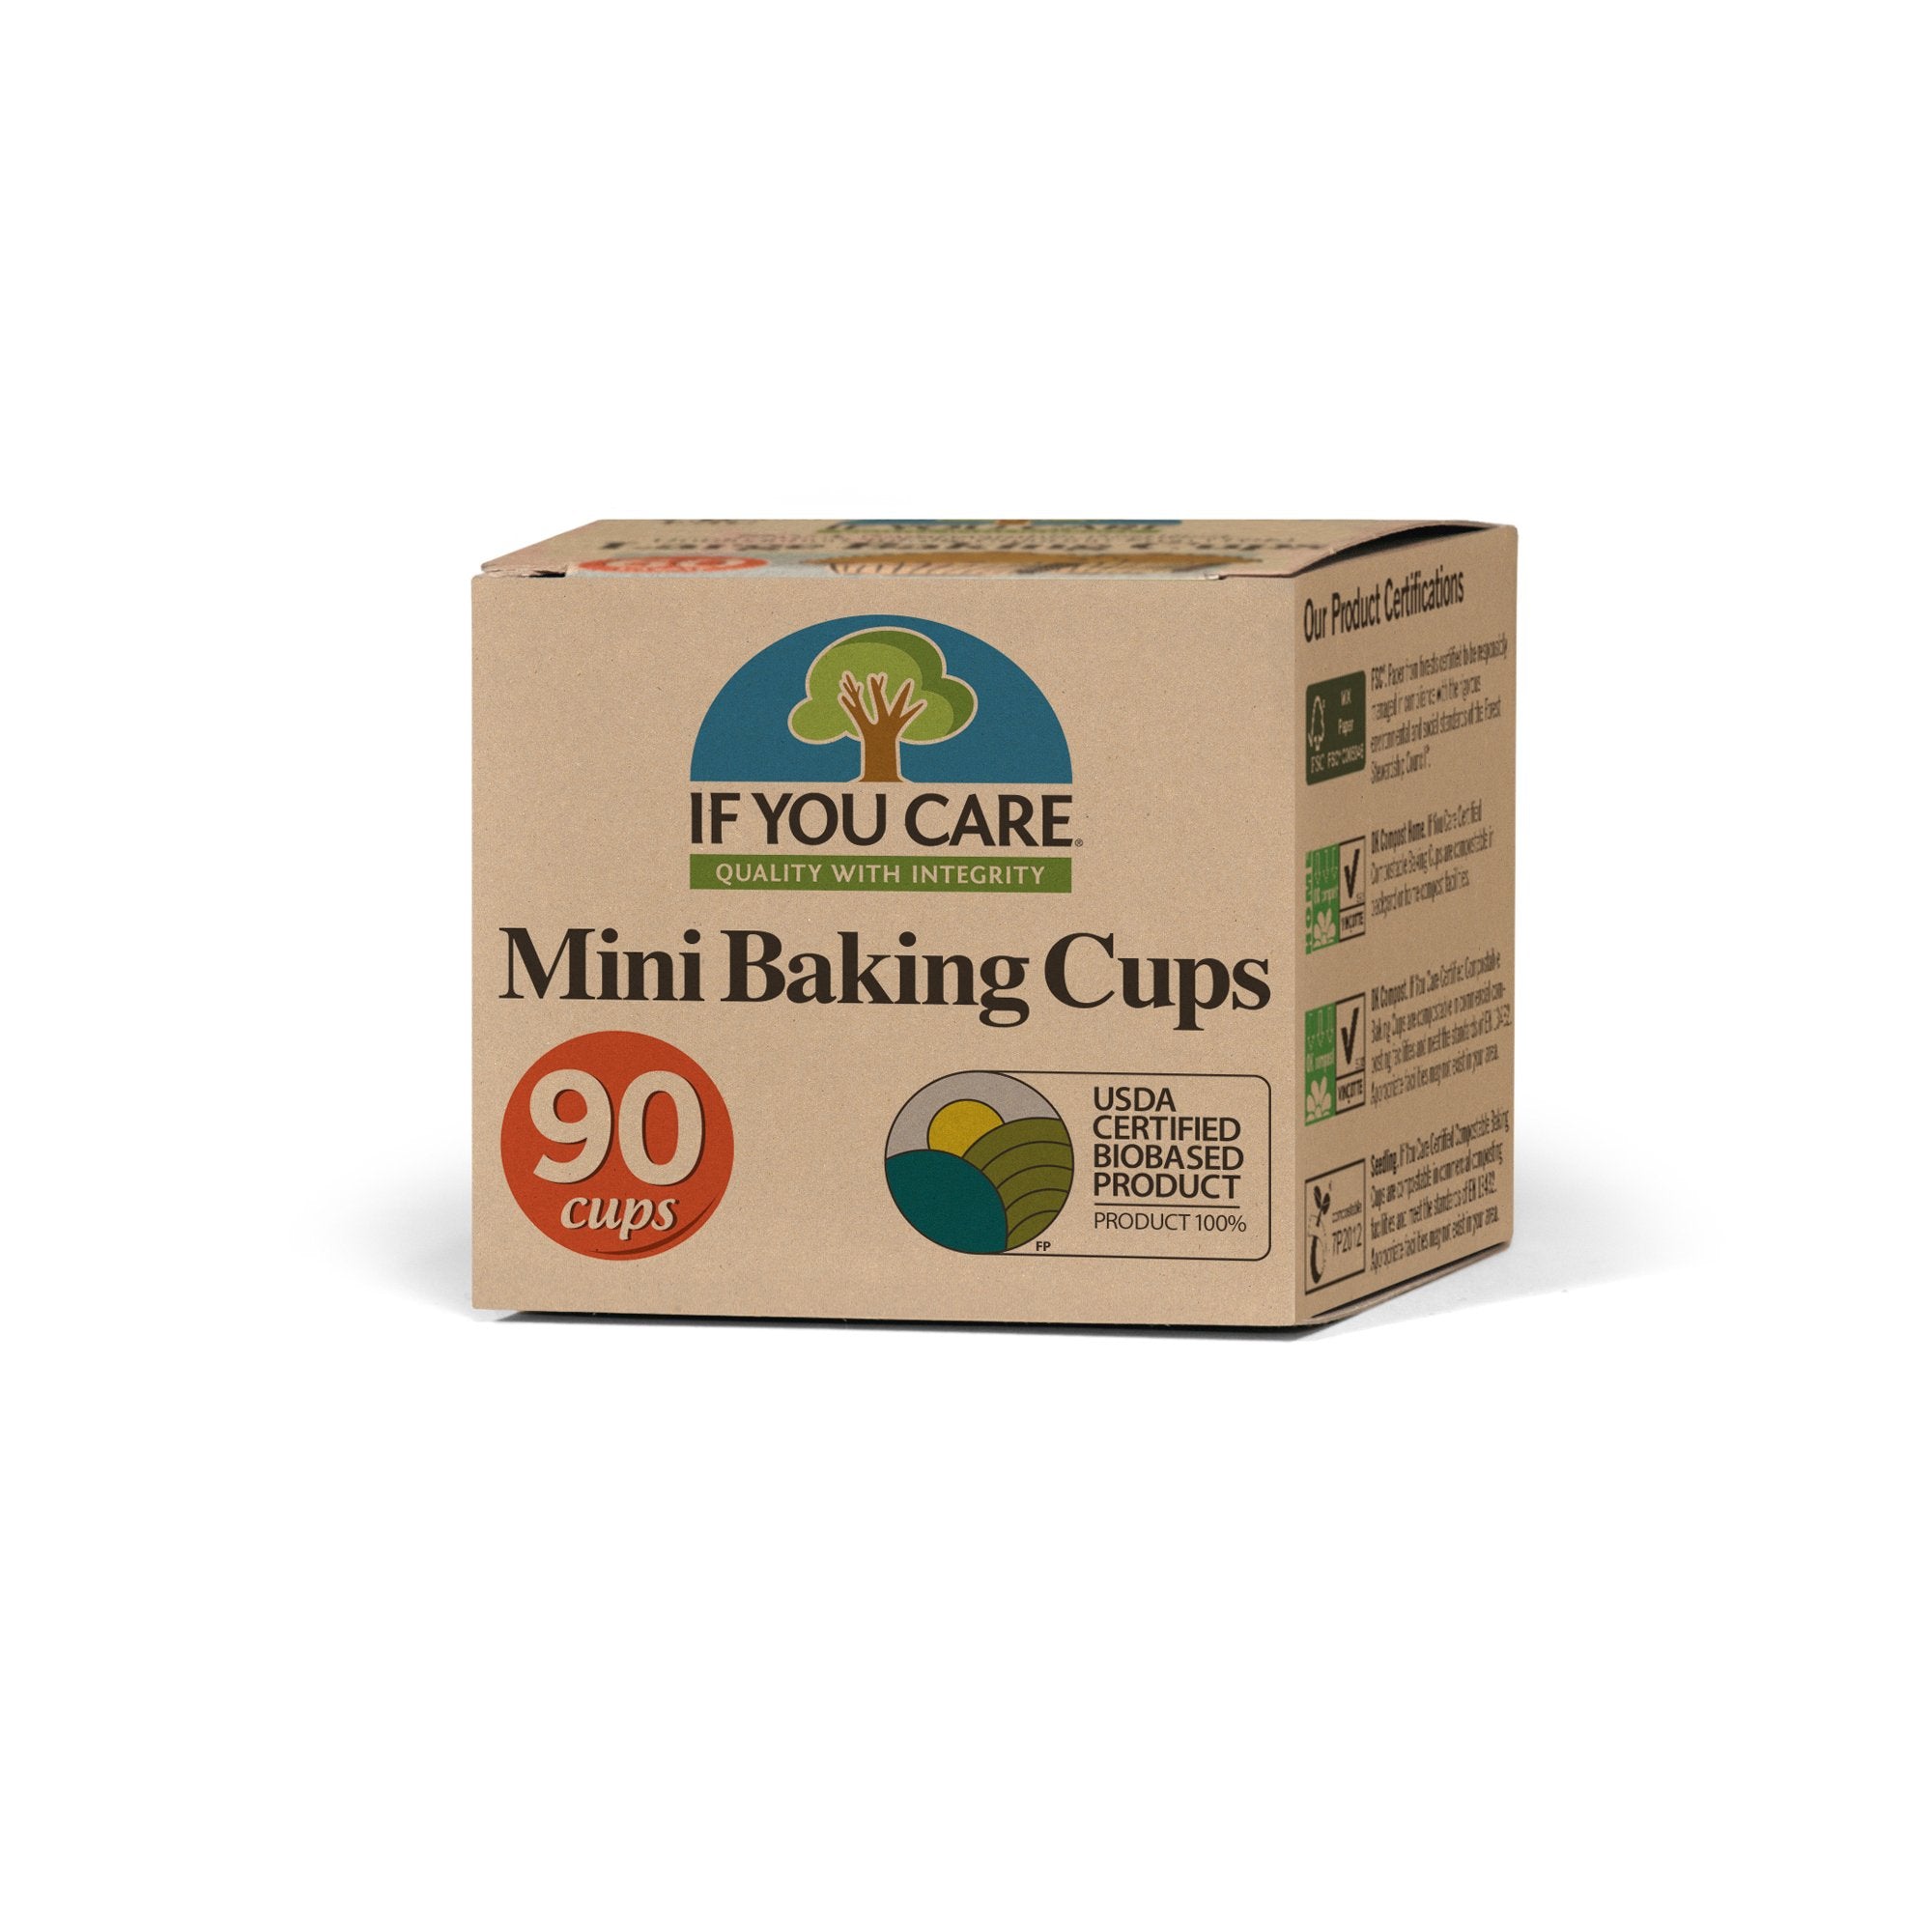 Mini Baking Cups, If You Care